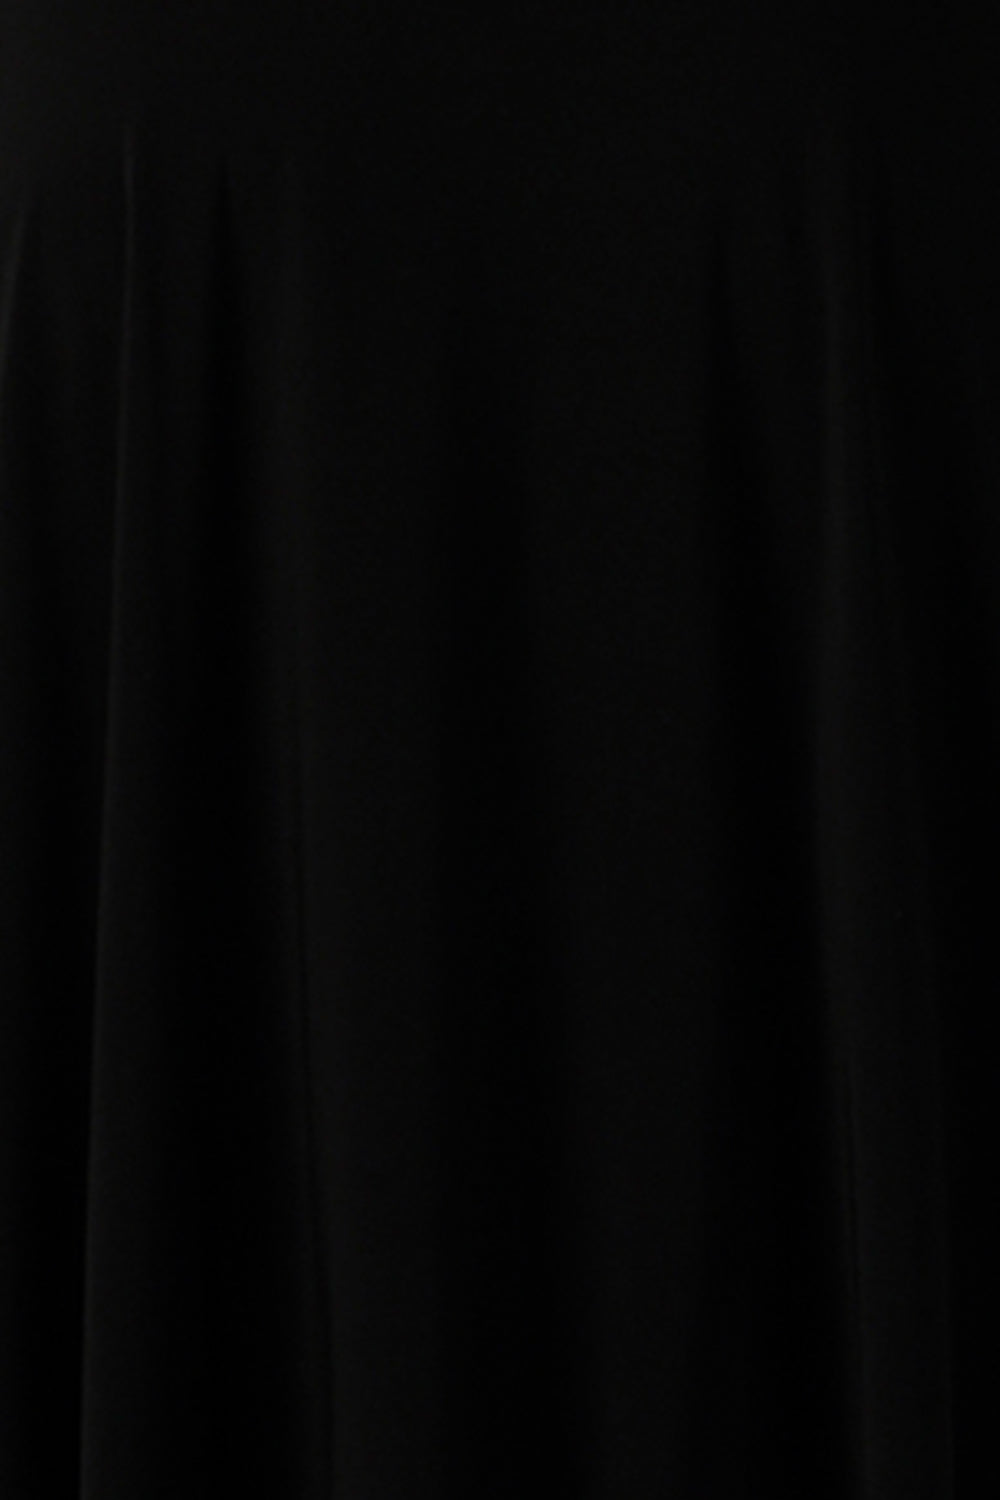 Black jersey fabric made in Australia for women size 8 - 24